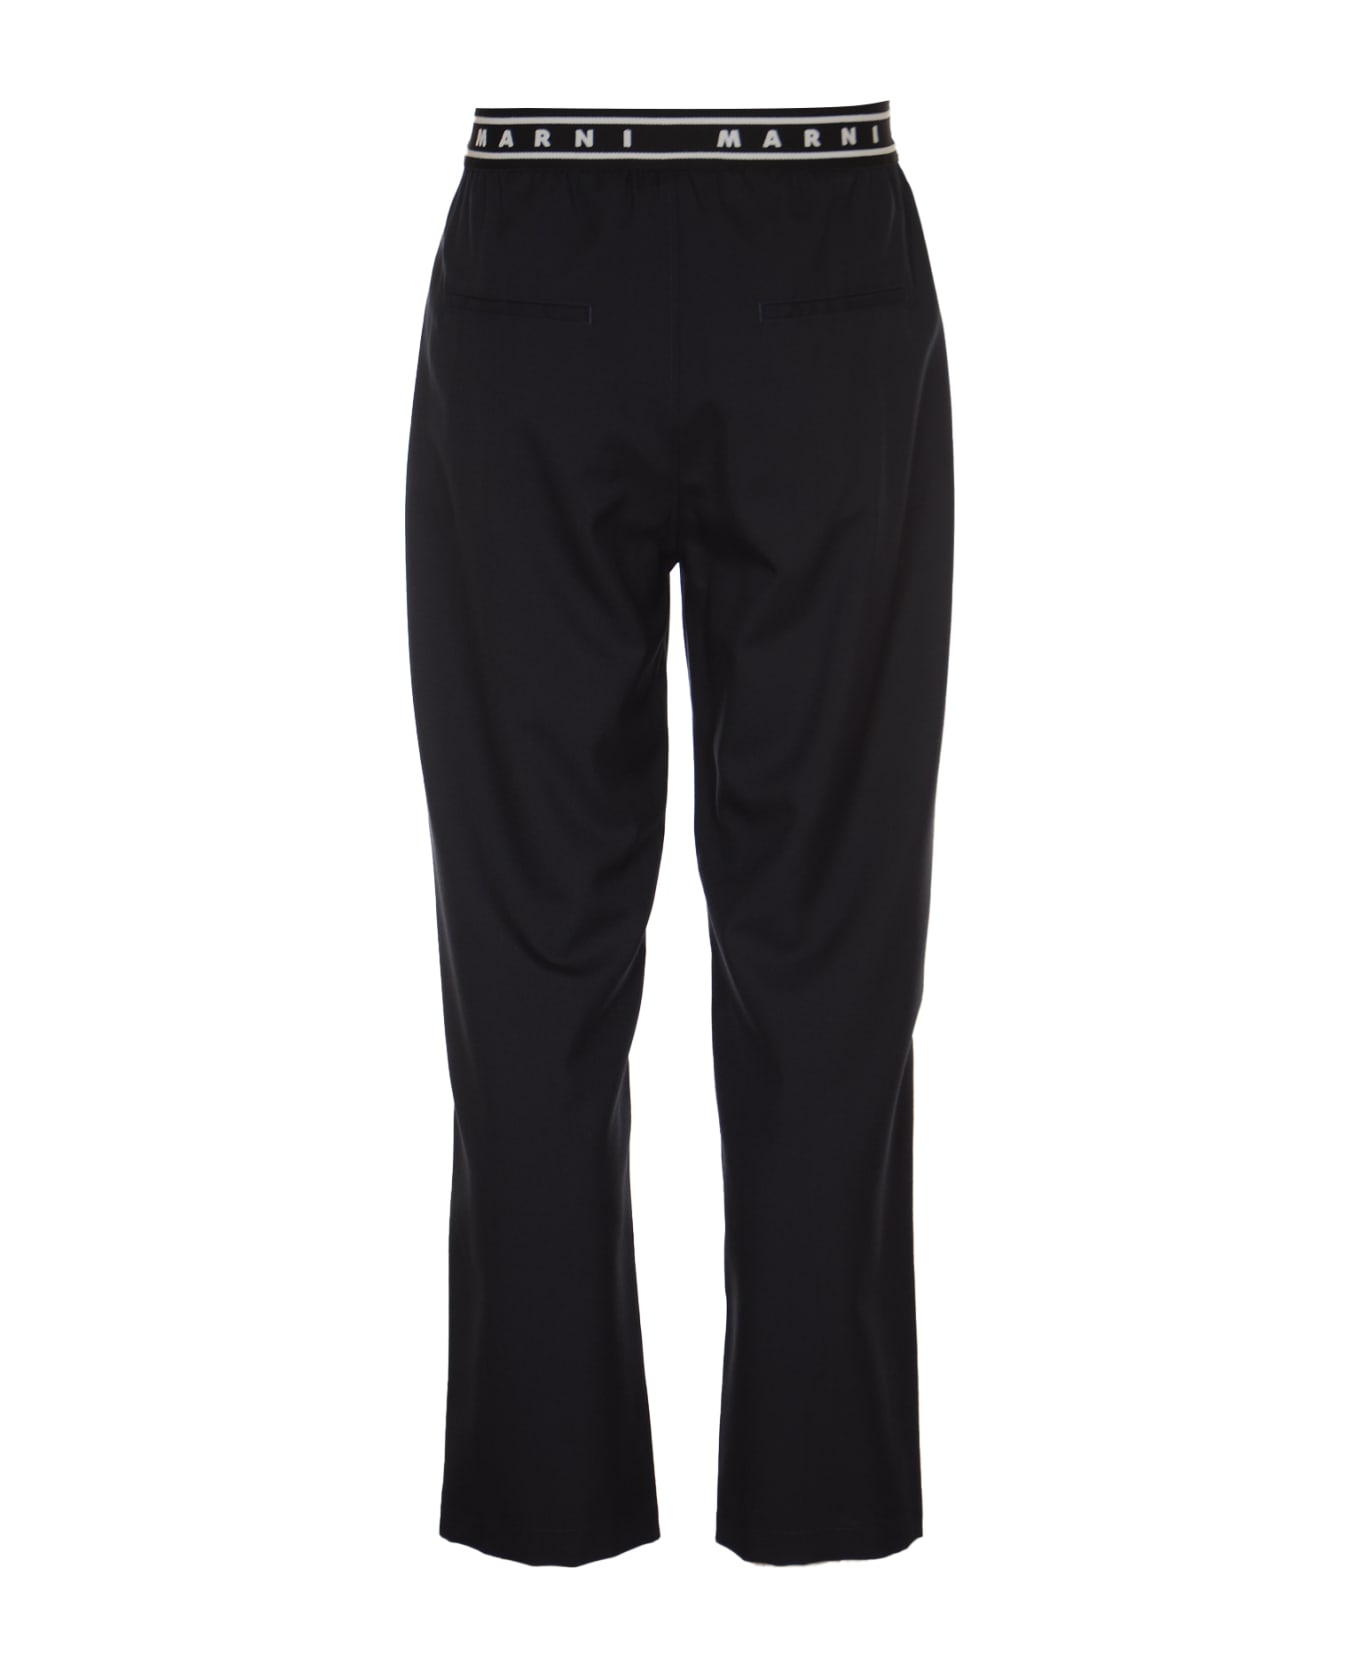 Marni Logo Waist Buttoned Trousers - Blue/Black ボトムス